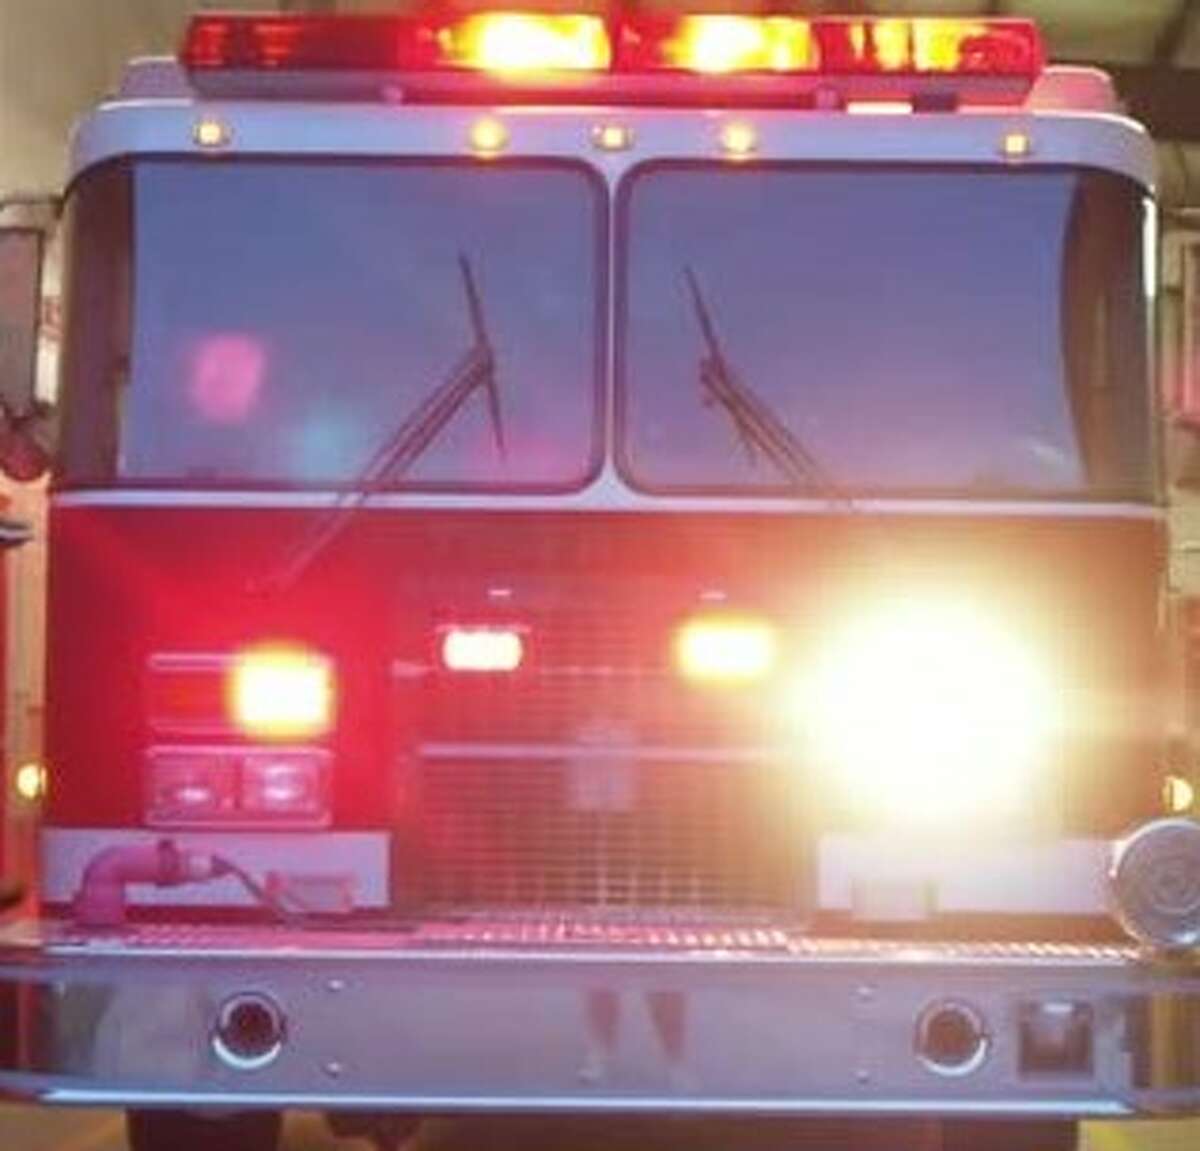 Four Madison County fire departments are sharing in $1.5 million in grants awarded by the Illinois State Fire Marshal.